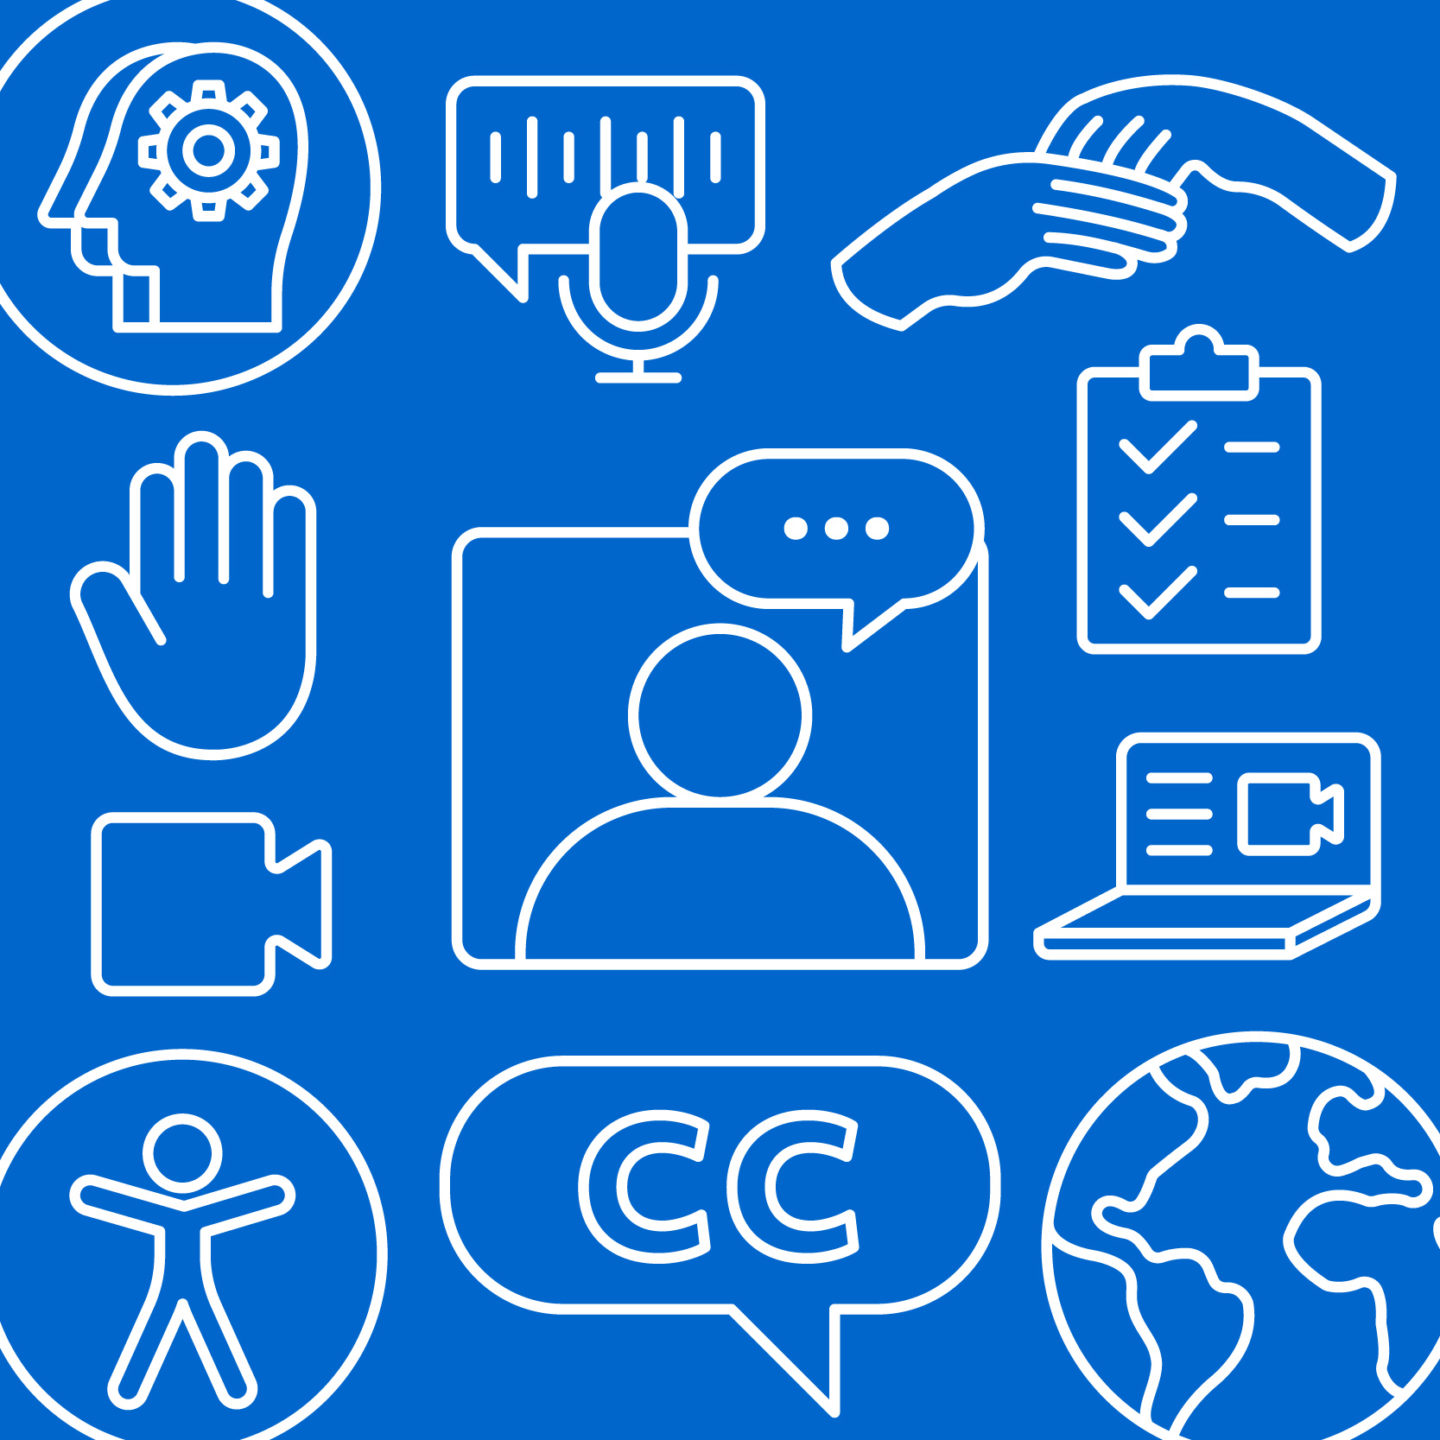 Various accessibility icons in white outline against blue background